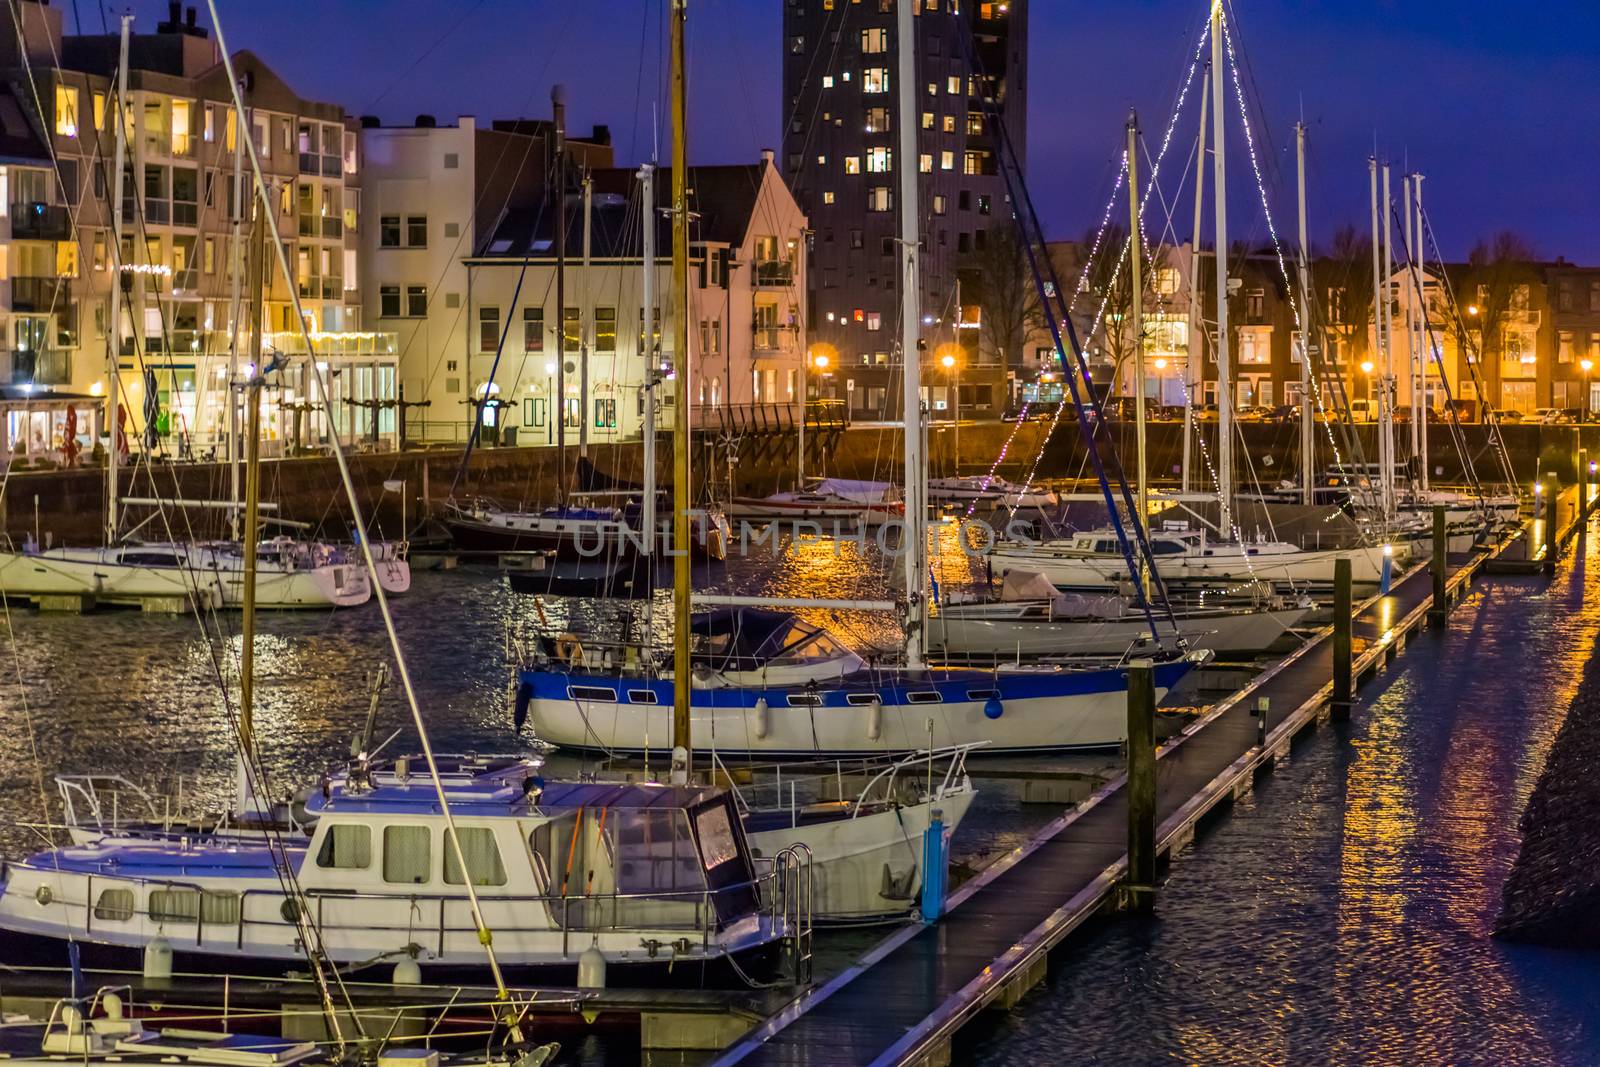 The harbor of vlissingen at night with many docked boats, decorated boats with lights, lighted city buildings with water, popular city in Zeeland, The Netherlands